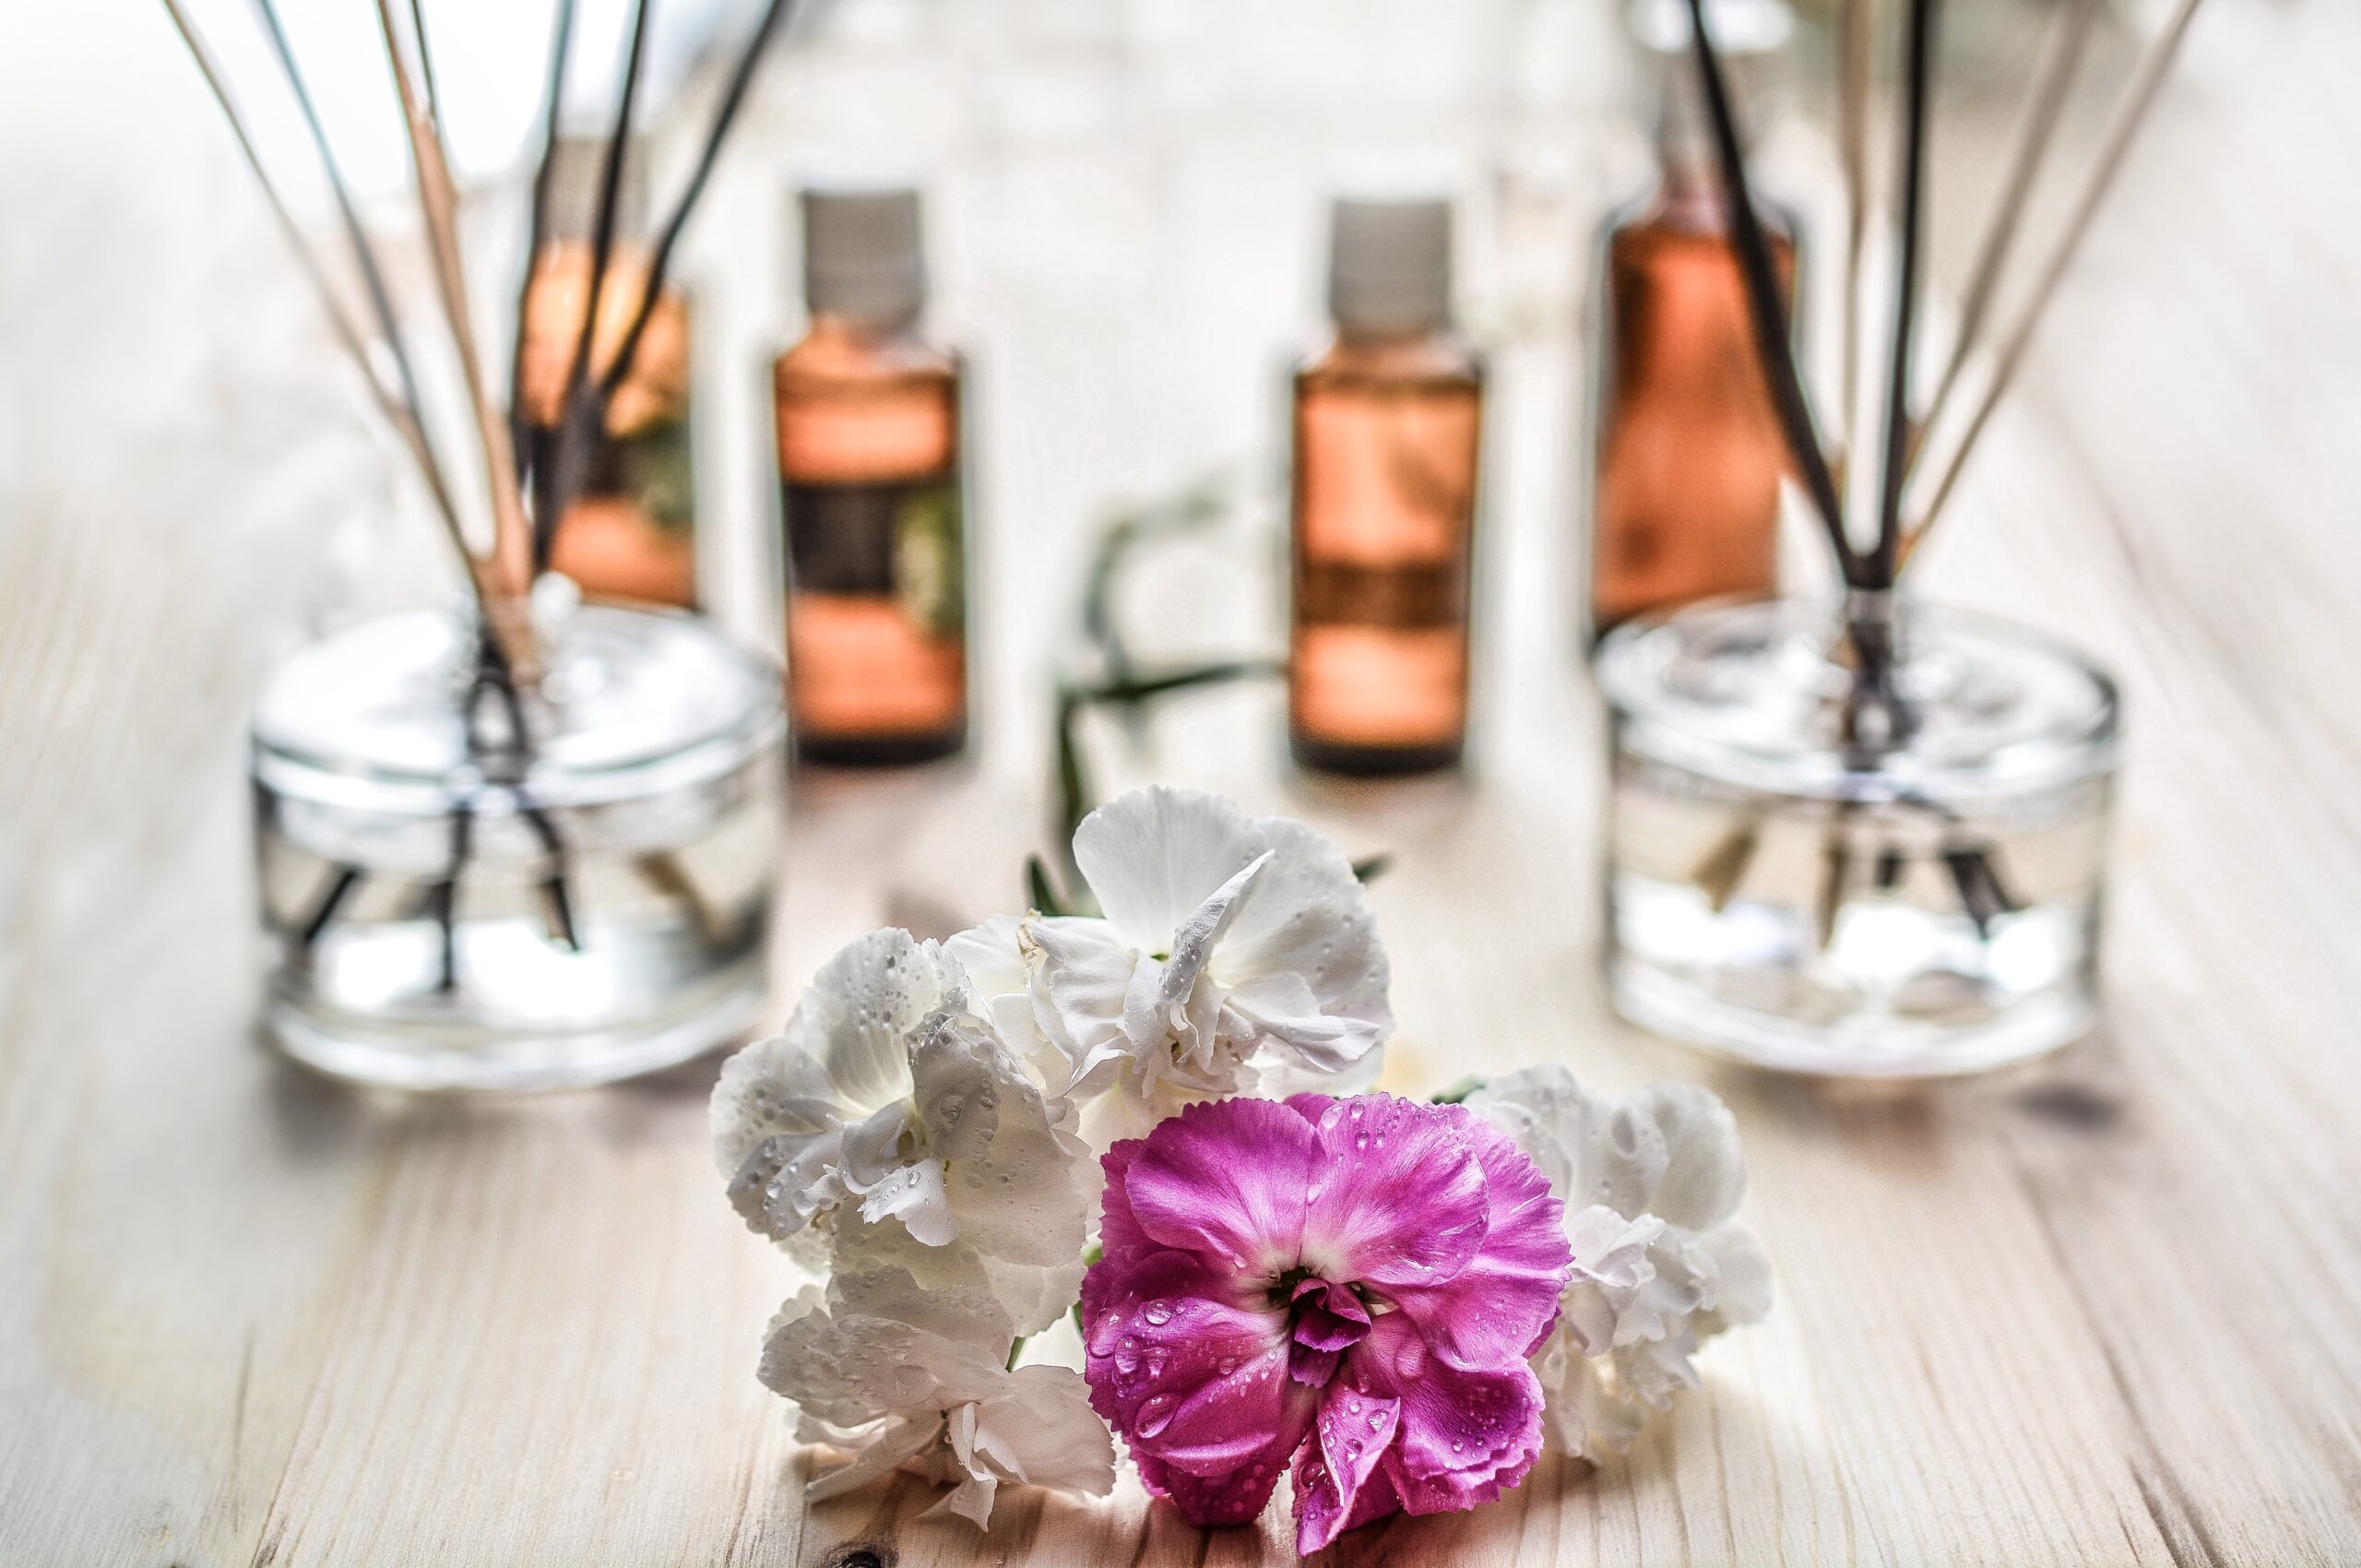 Flowers, bottles of essential oils, and essential oil diffusers